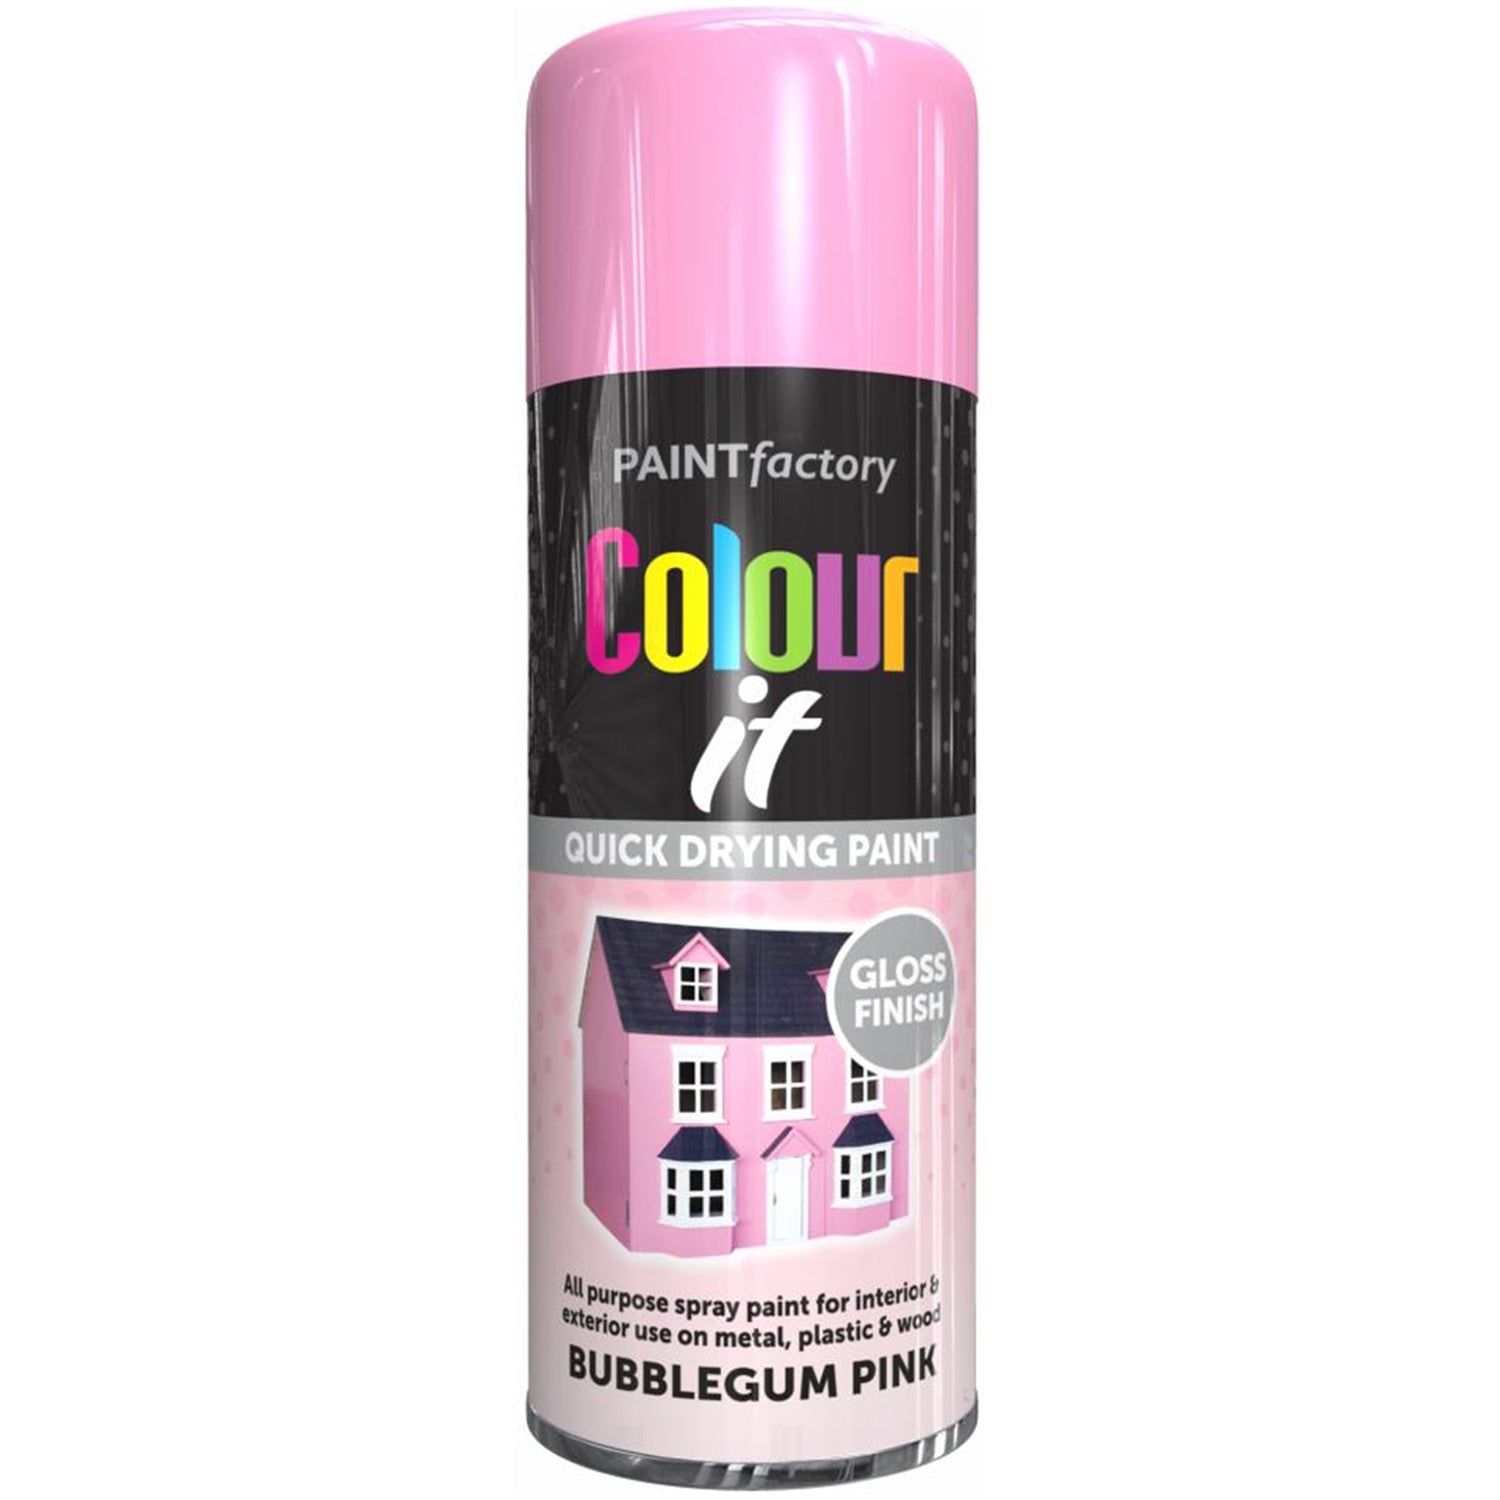 Pearlised Pink Spray Paint 400ml - Paint Factory